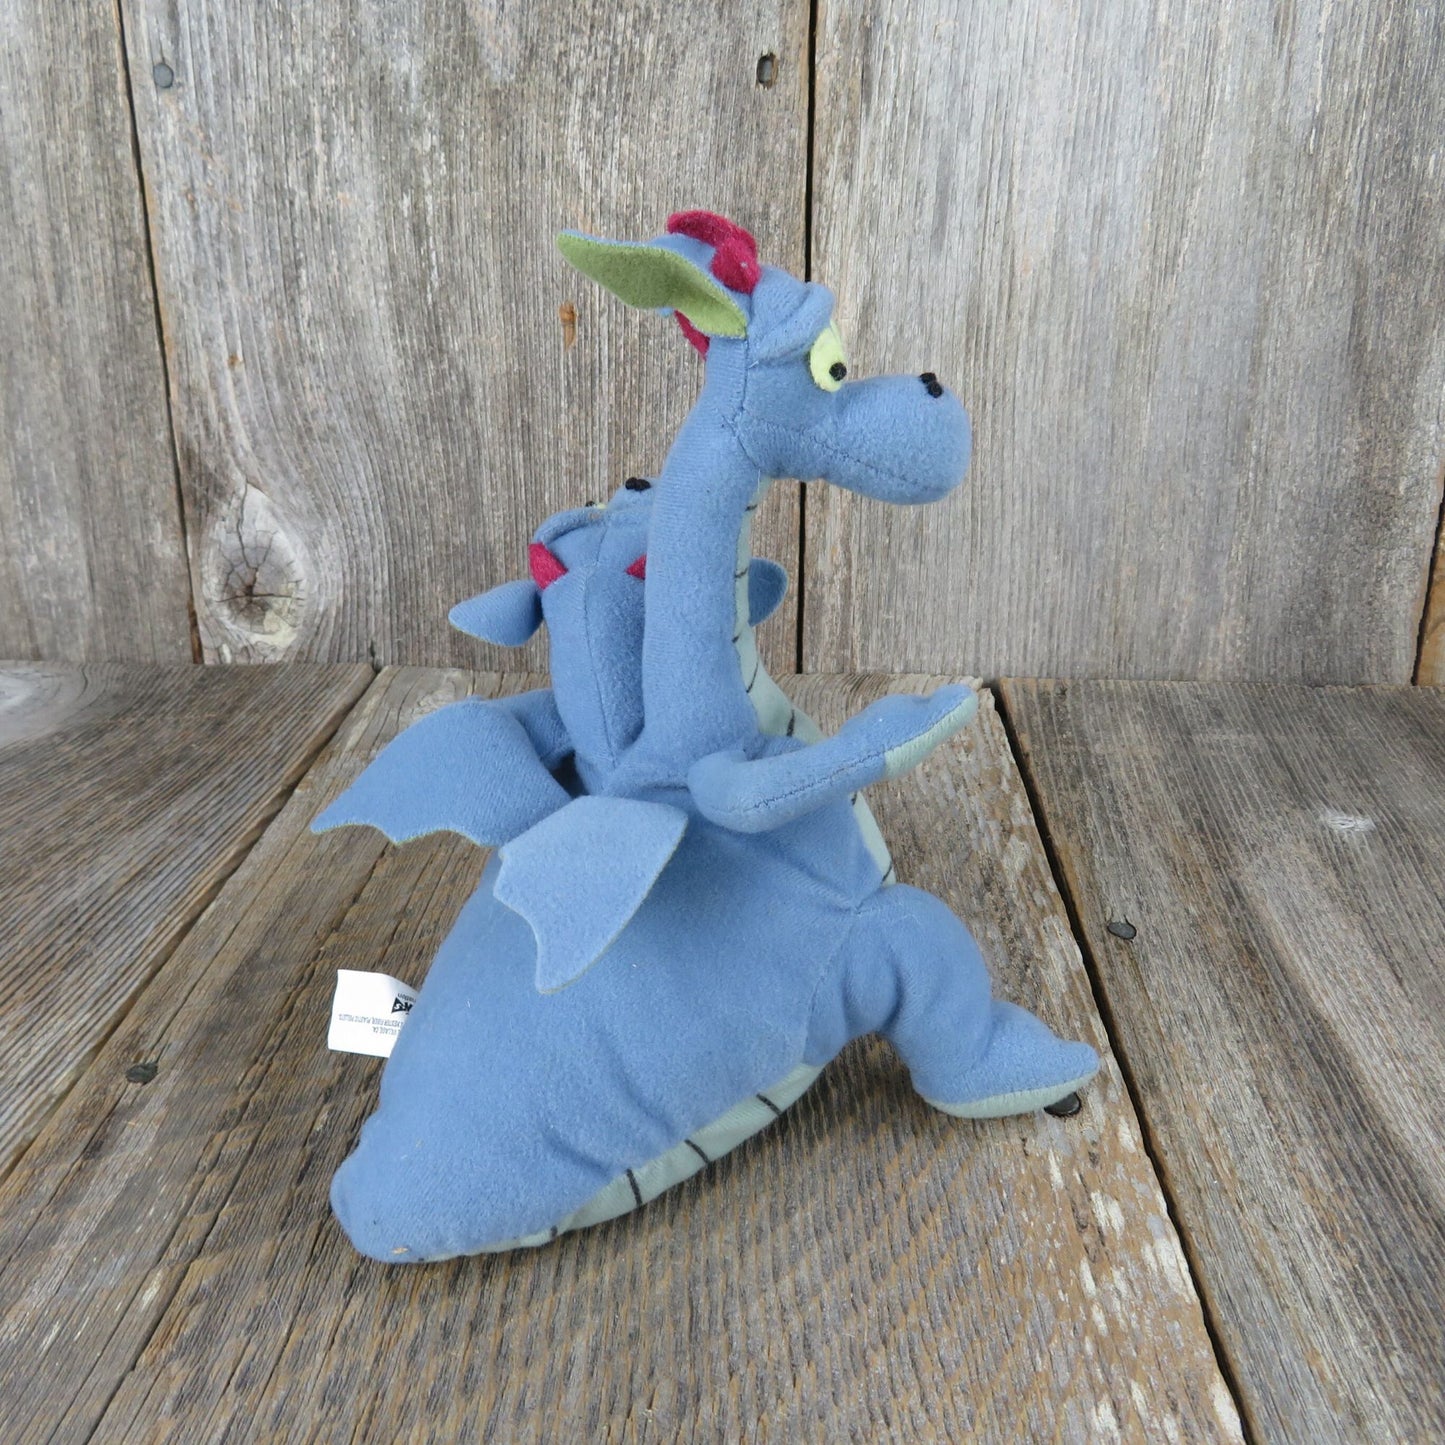 Vintage Devon Cornwall Dragon Bean Bag Plush Quest for Camelot Beanie Warner Brothers Store Stuffed Animal 1998